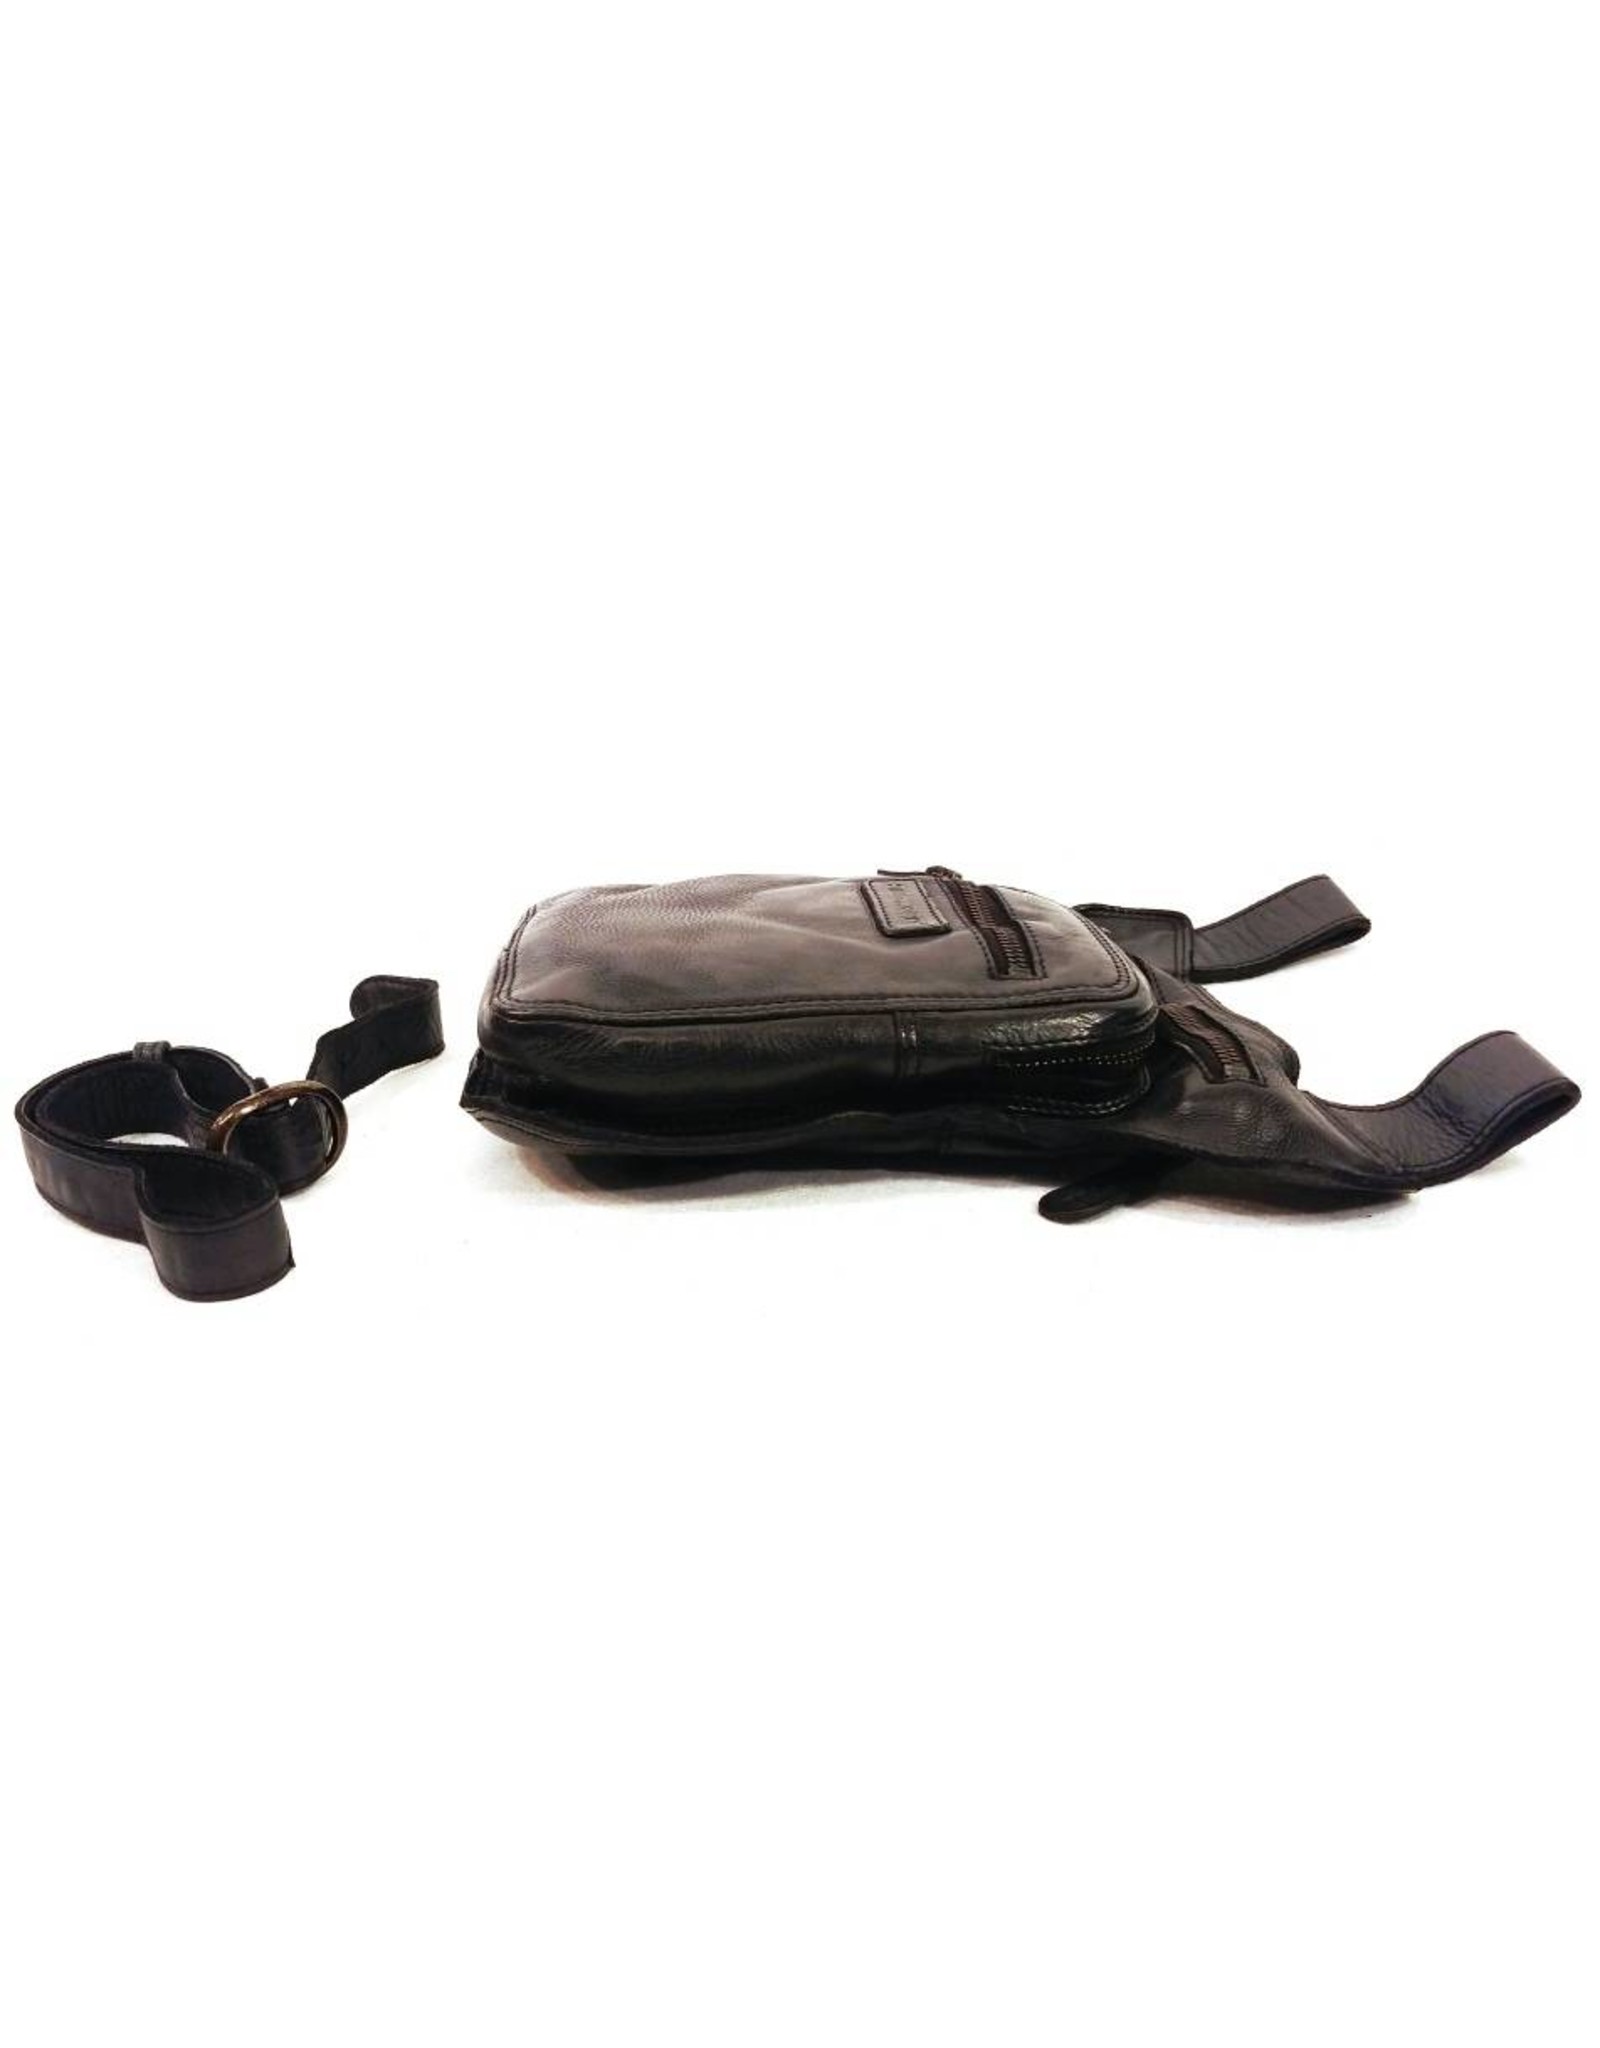 HillBurry Leather Festival bags, waist bags and belt bags - HillBurry  belt bag - leg bag washed leather black